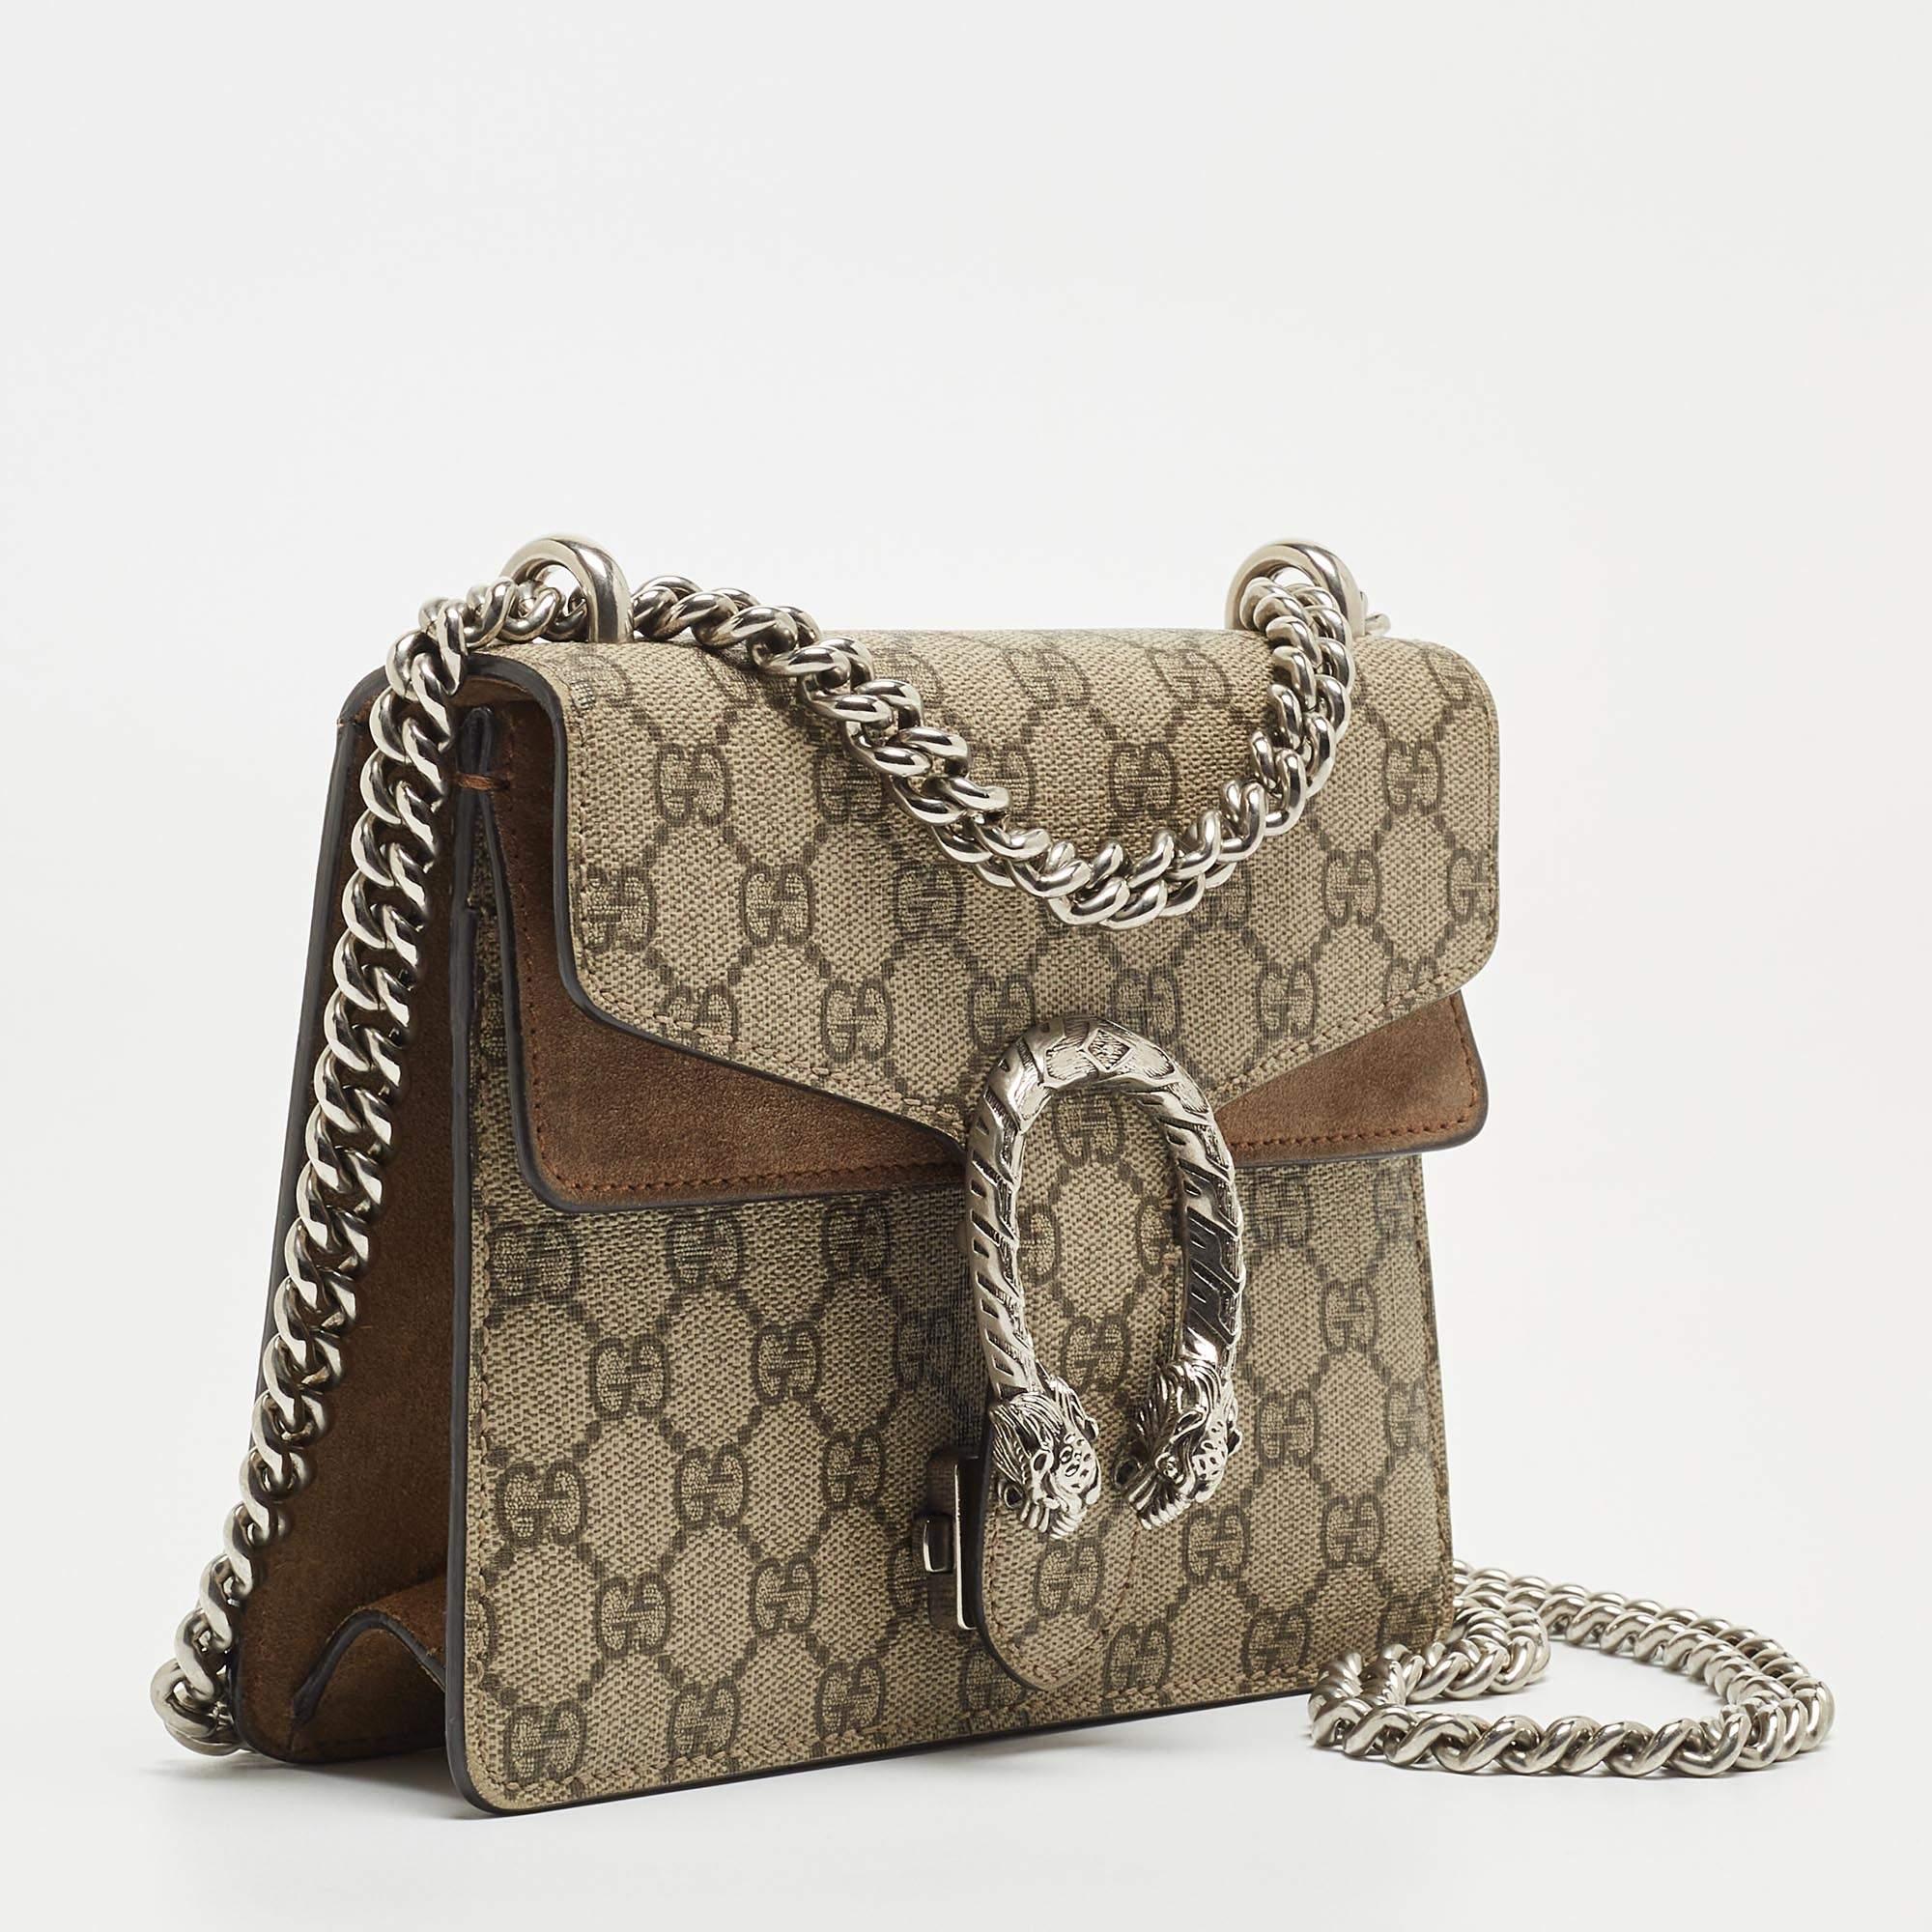 Carry everything you need in style thanks to this Gucci Dionysus bag. Crafted from the best materials, this is an accessory that promises enduring style and usage.

